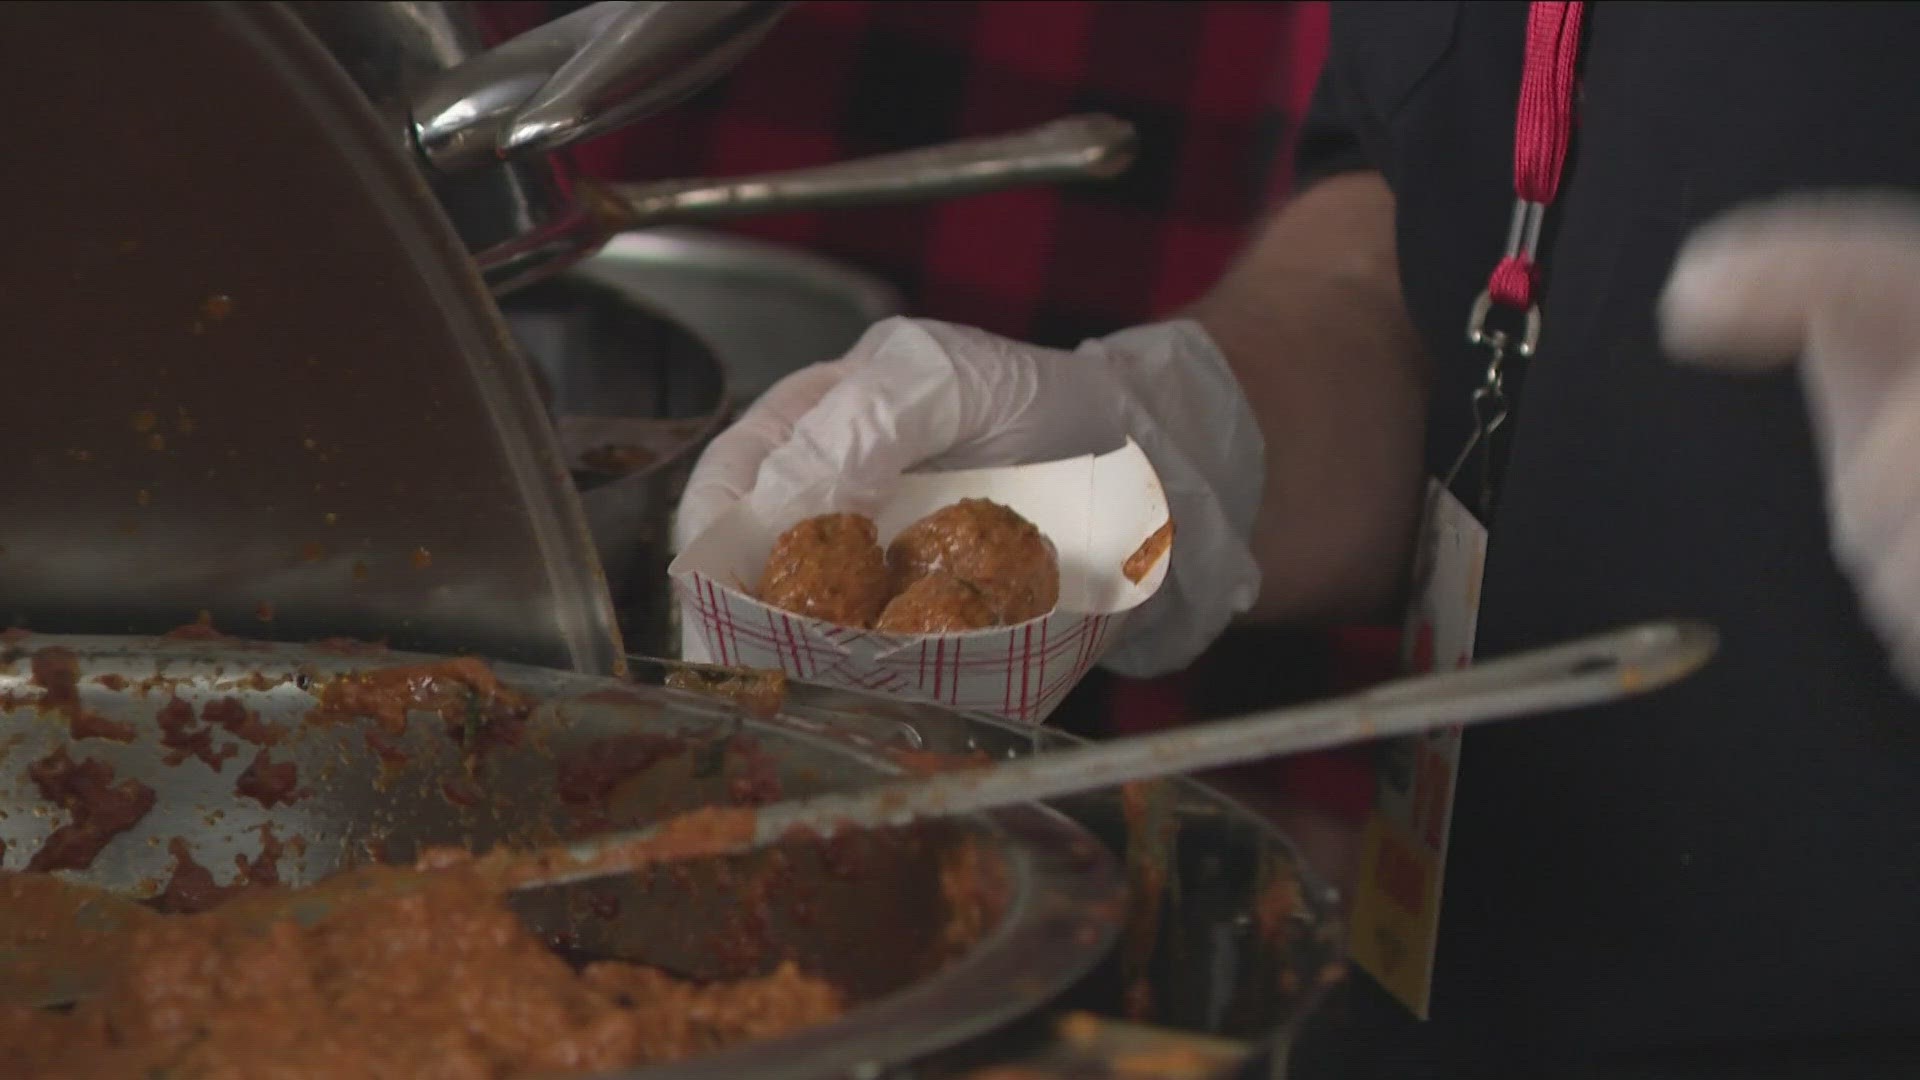 More than a dozen of Buffalo's meatballers came out to Mohawk Street on Sunday.